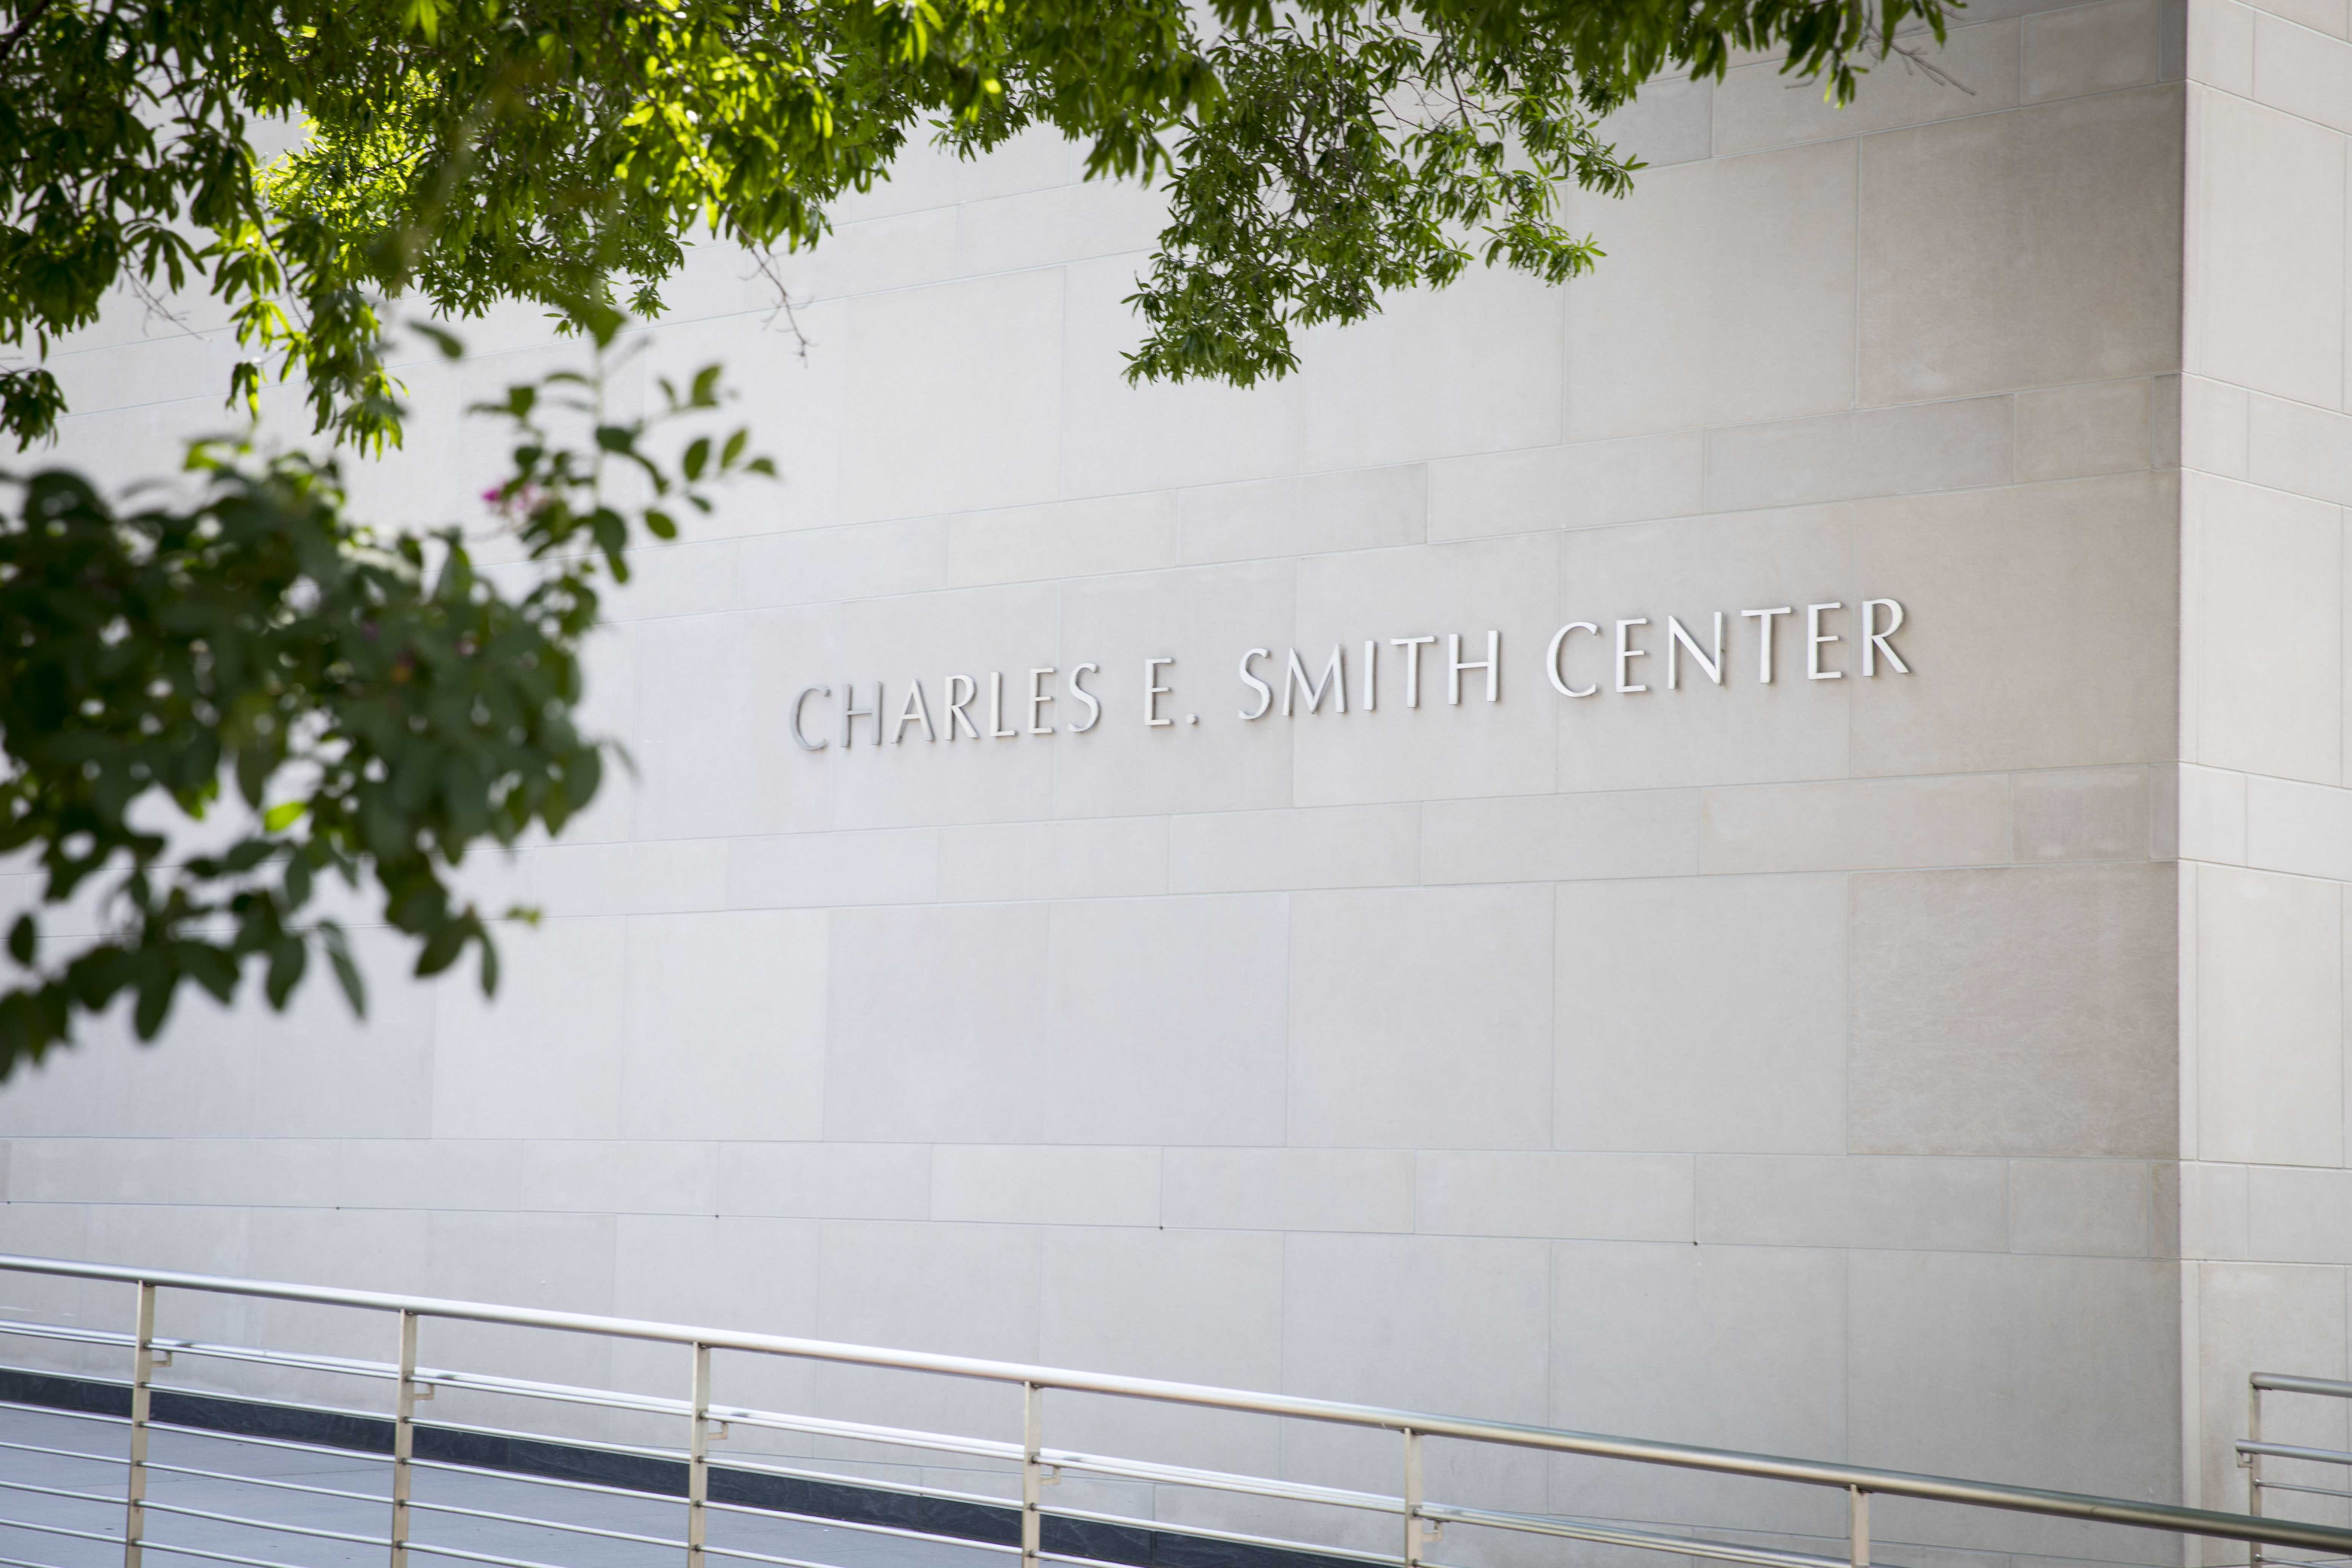 The Charles E. Smith Center on 22nd Street